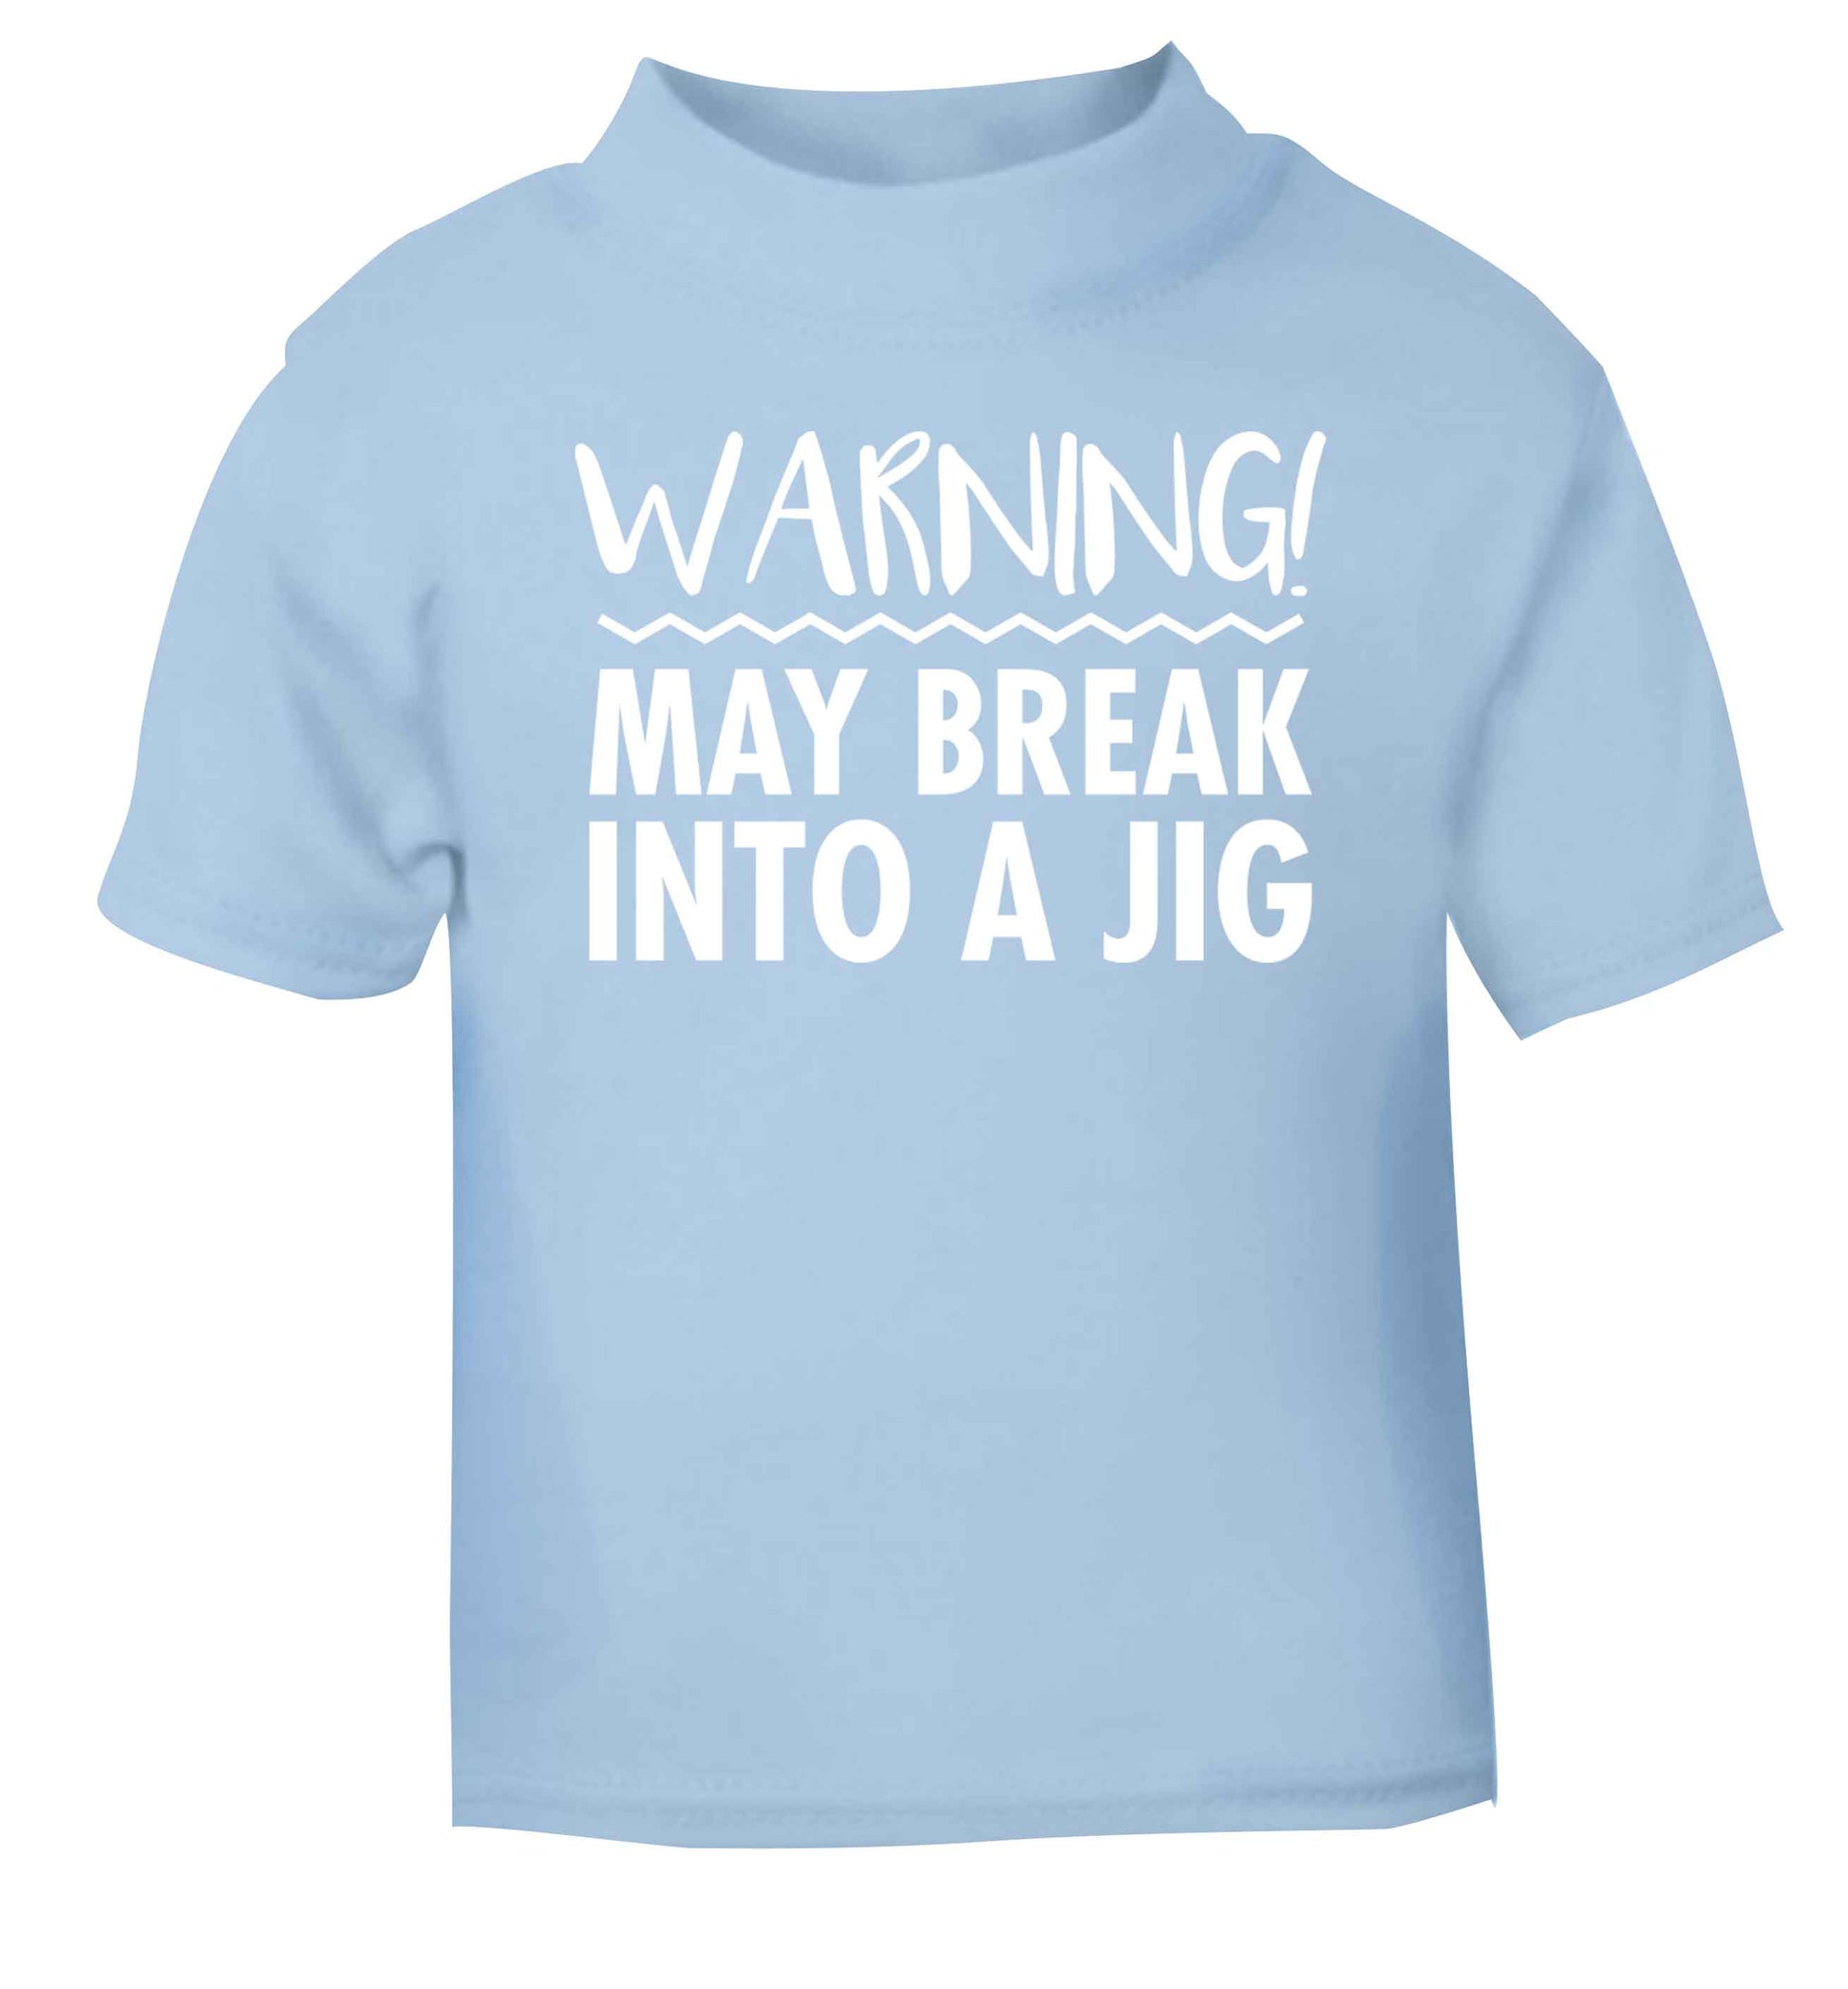 Warning may break into a jig light blue baby toddler Tshirt 2 Years